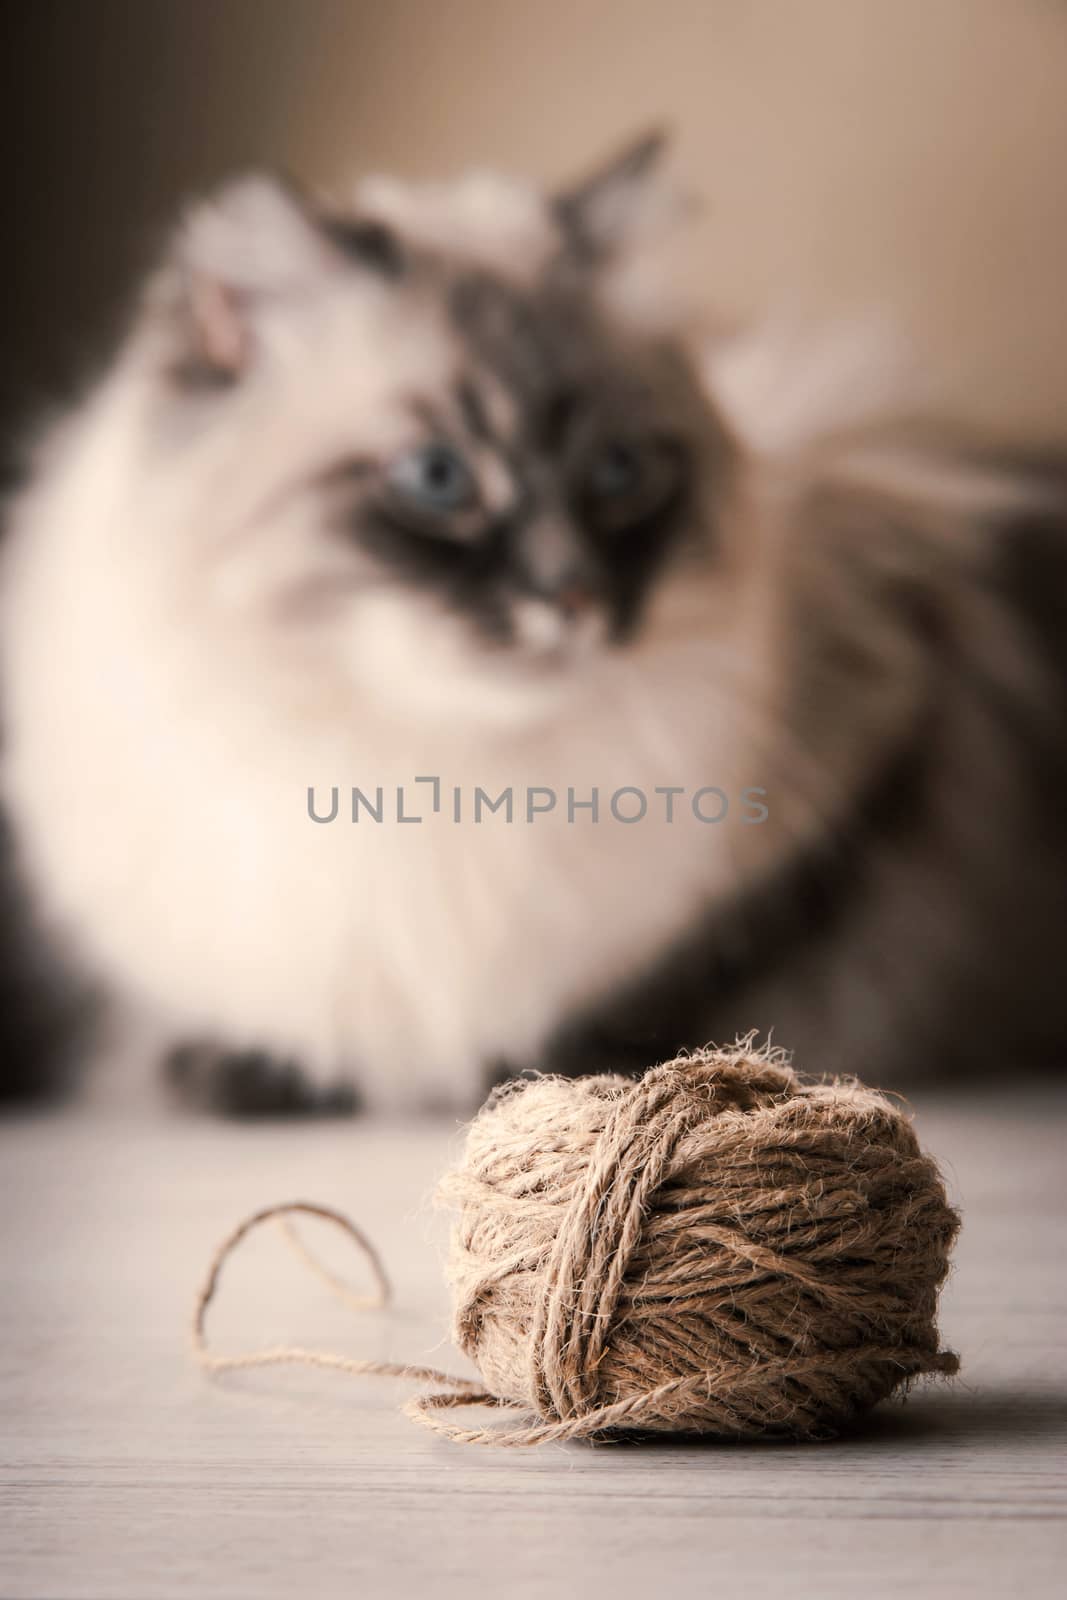 Blurred Siberian cat with clew by Deniskarpenkov